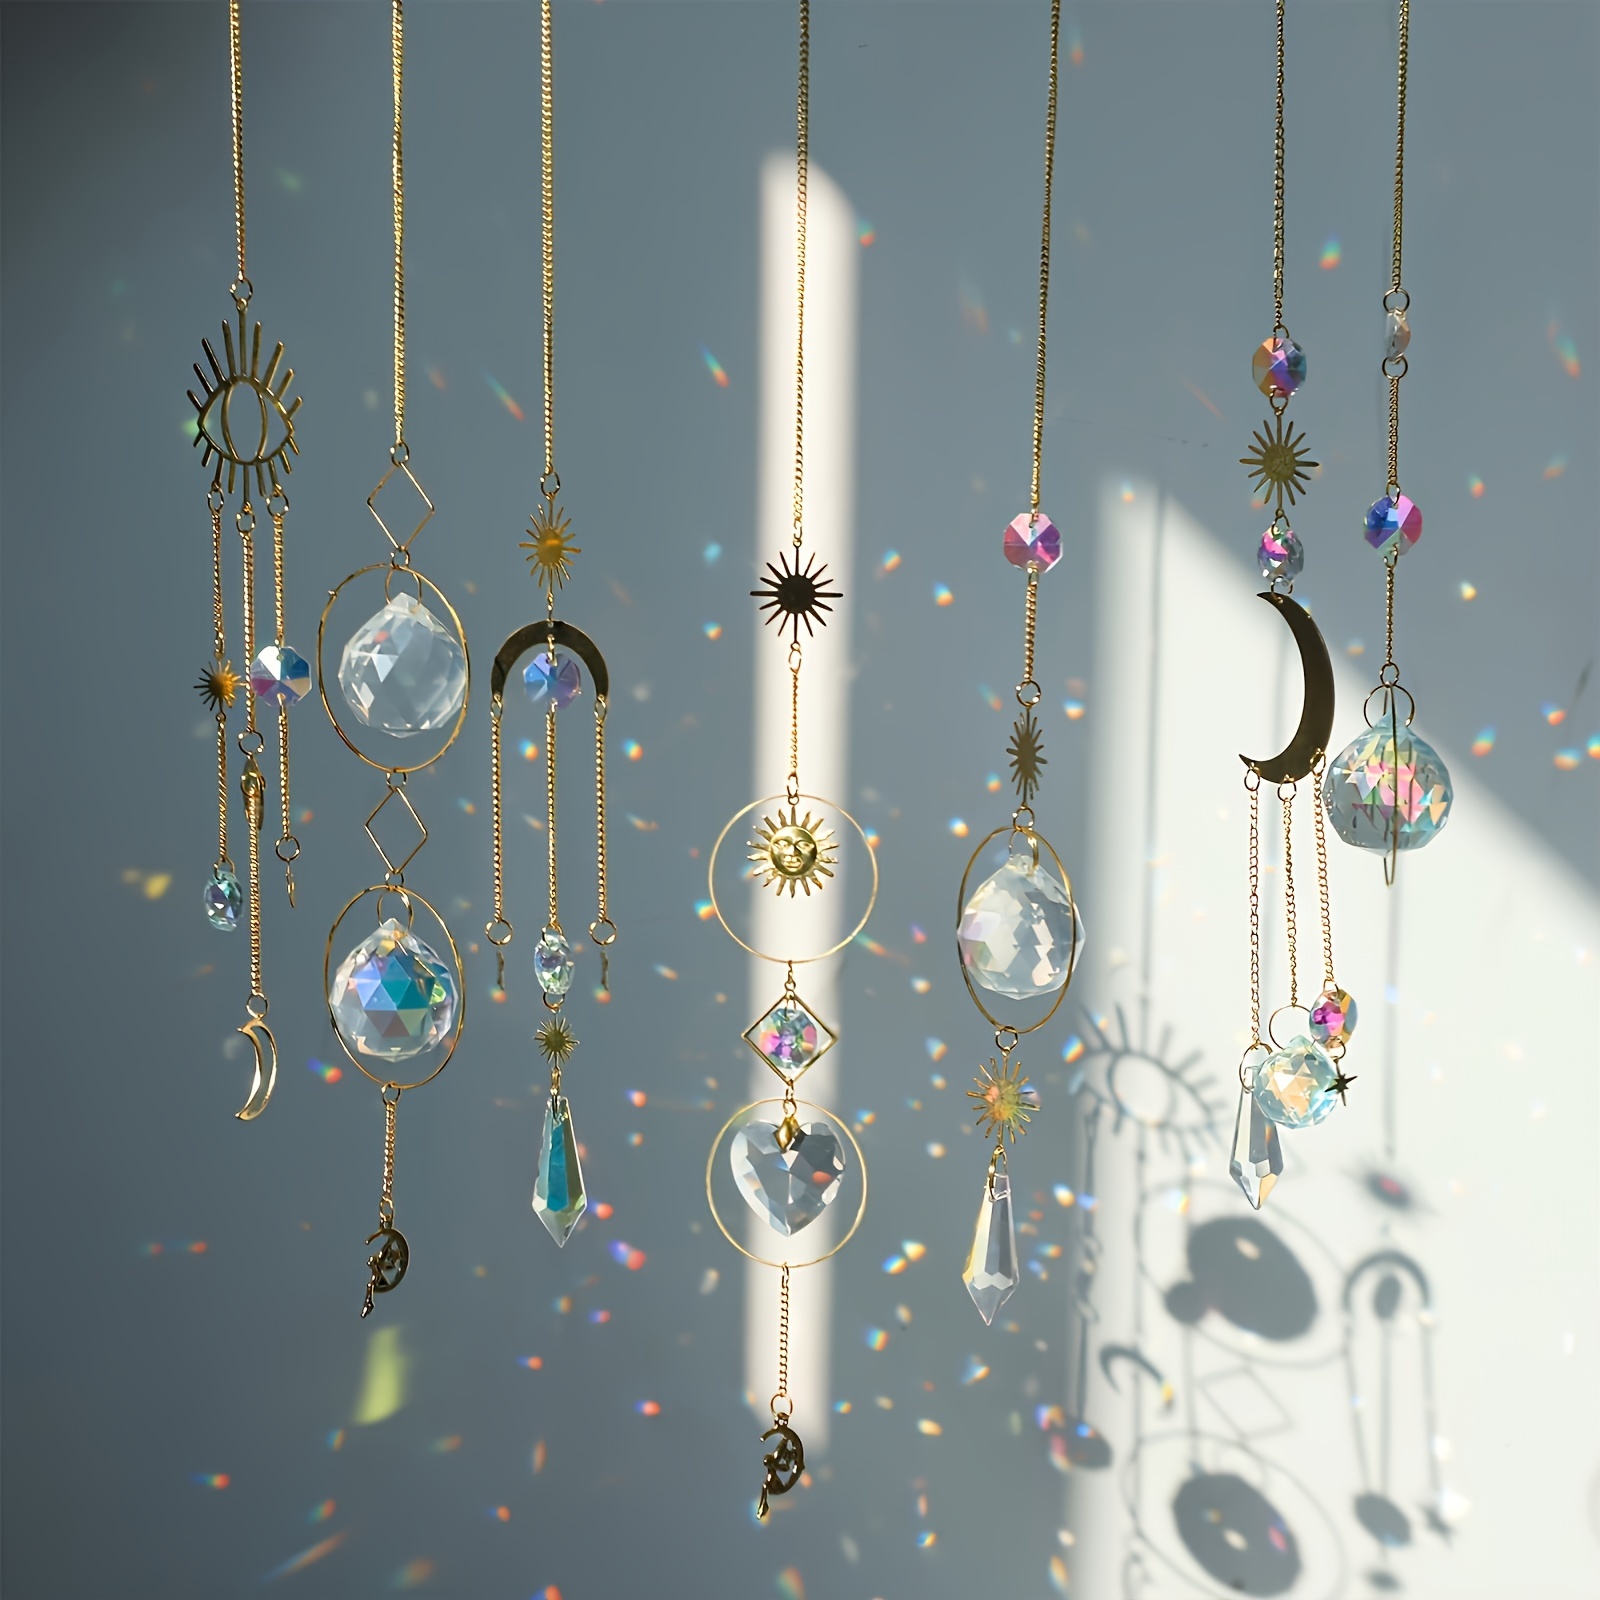 

7pcs Crystal Hanging Sun Catcher, Golden Moon Star Sun Catcher With Chain, Colorful Crystal Glass Ball Pendant Ornament For Window Bedroom Car Home Garden Office, Party Wedding Decoration